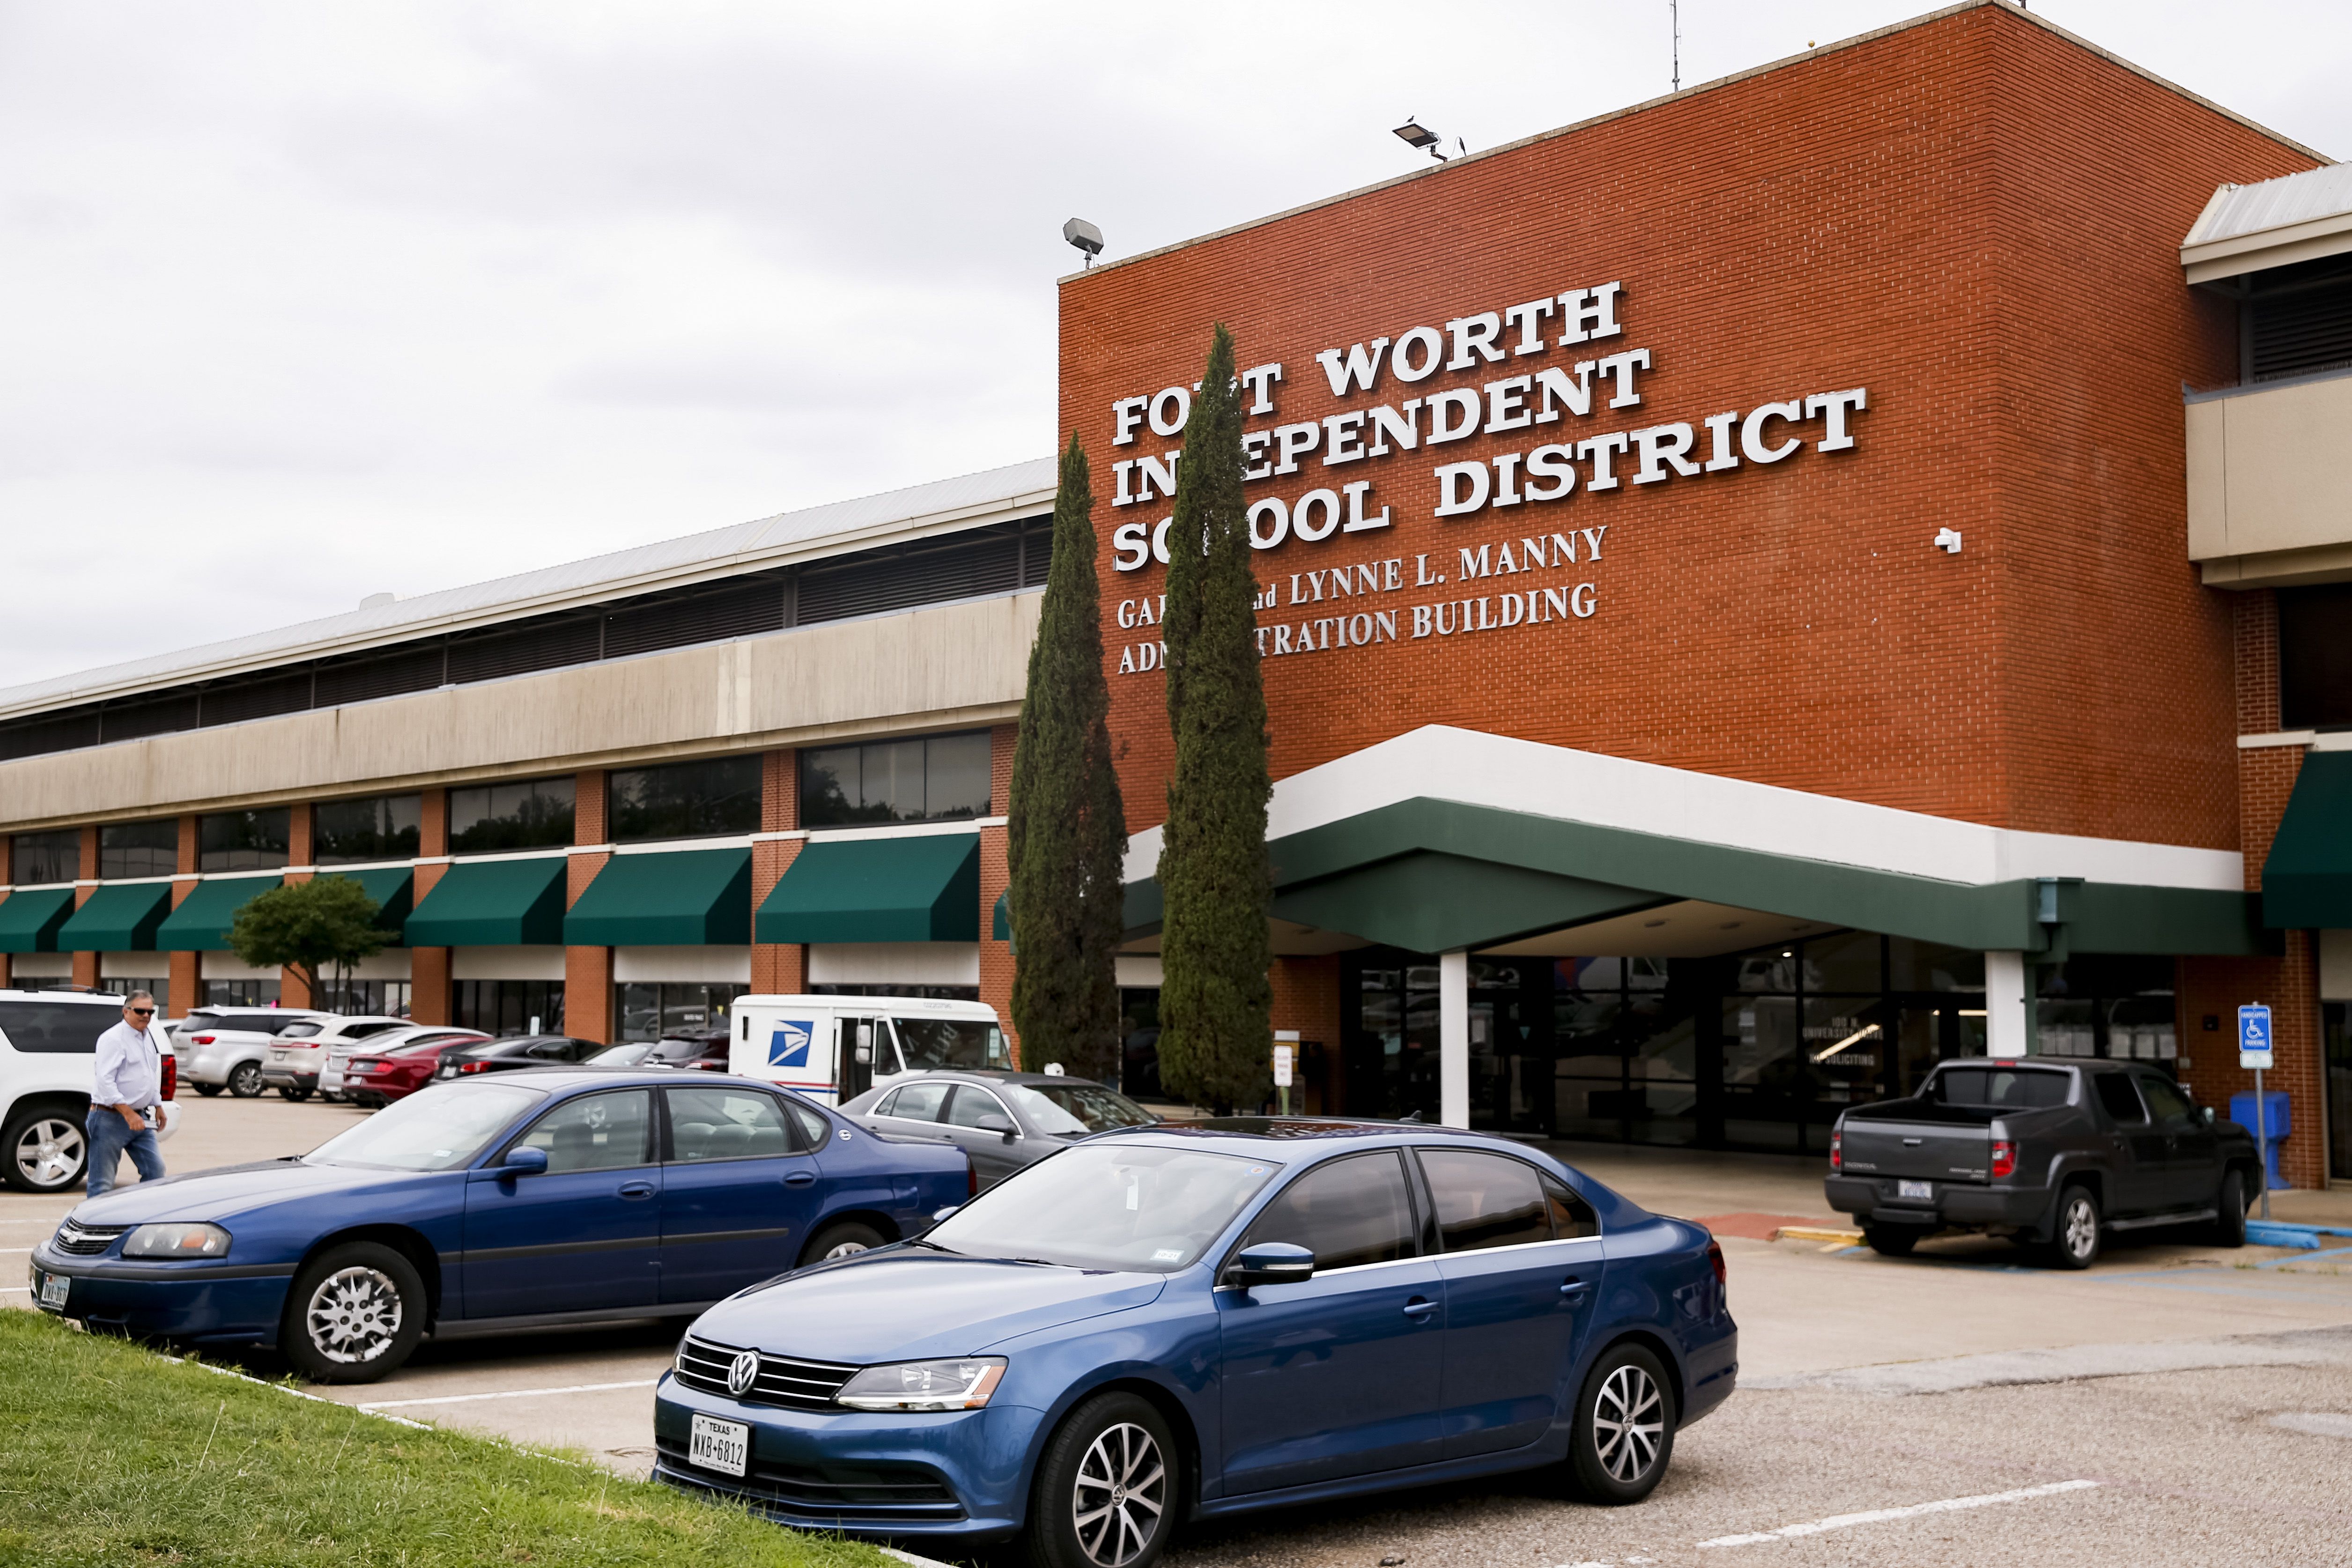 Dallas-Fort Worth parents are way above average in back-to-school spending